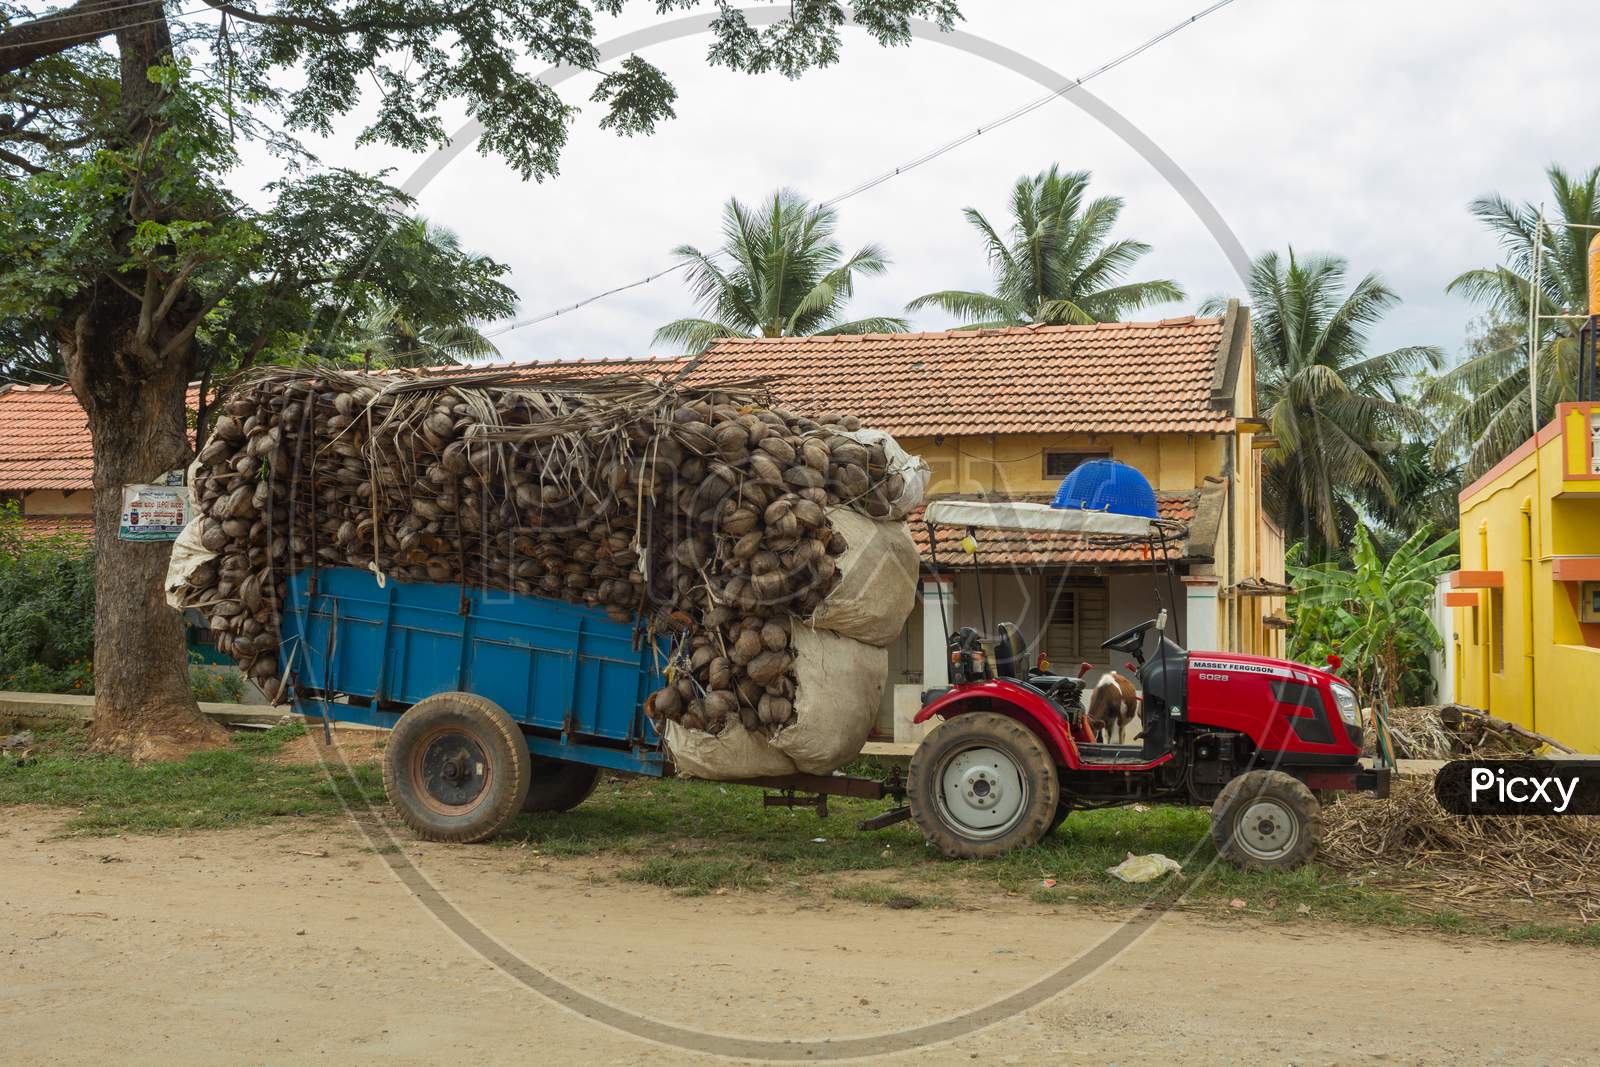 A Typical Rural scene of a Village street with a Tractor filled with Dry Coconut Shells in front of a Tiled roof House near Mysuru in Karnataka/India.